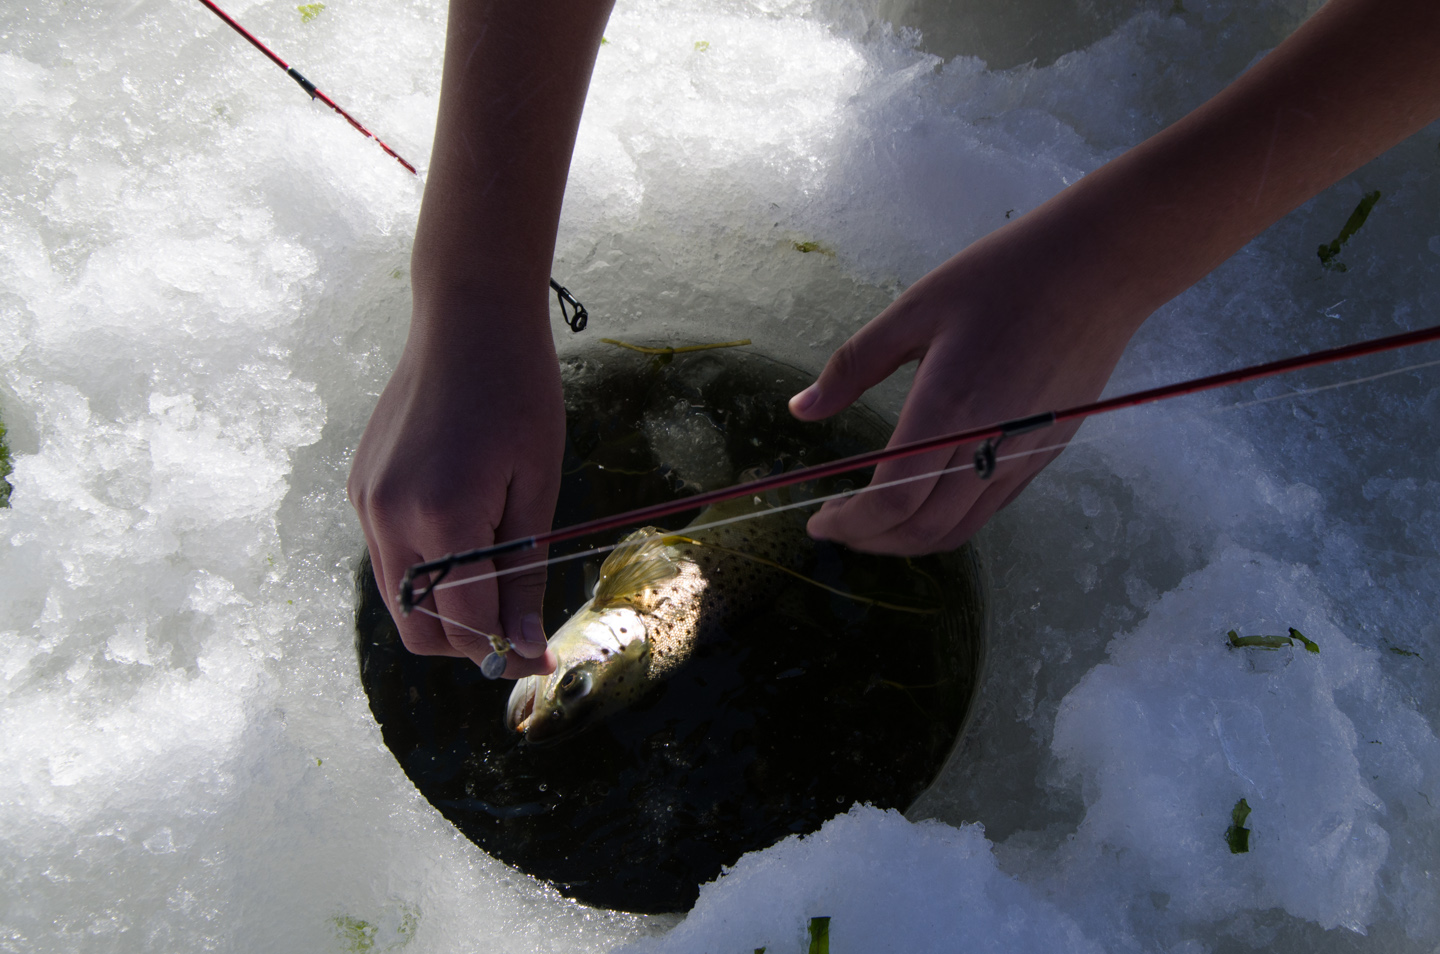 Students release a trout back into the icy water.